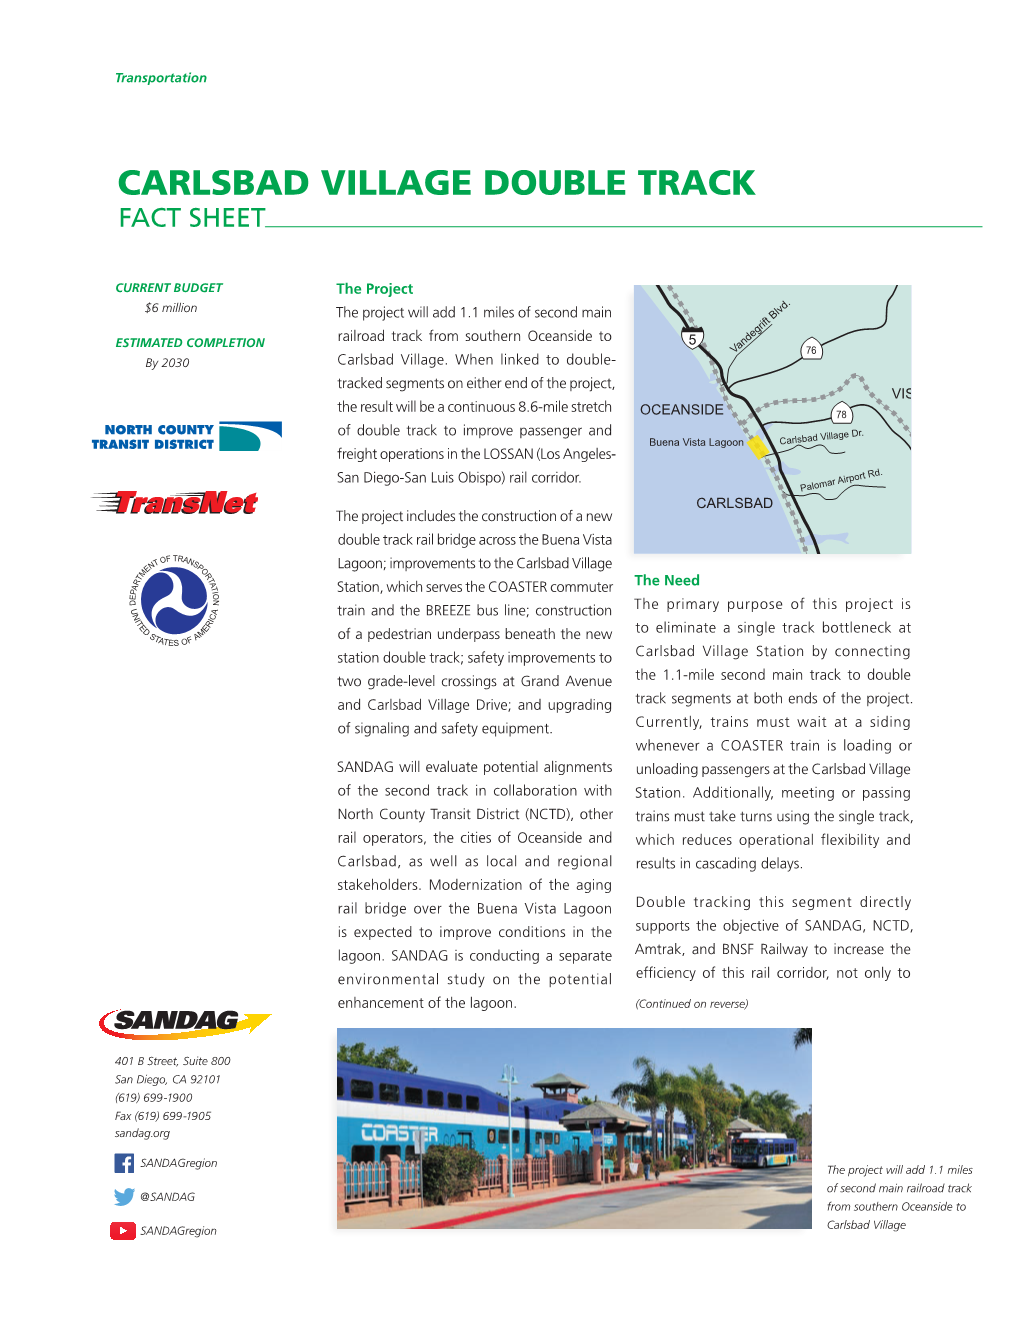 Carlsbad Village Double Track Fact Sheet